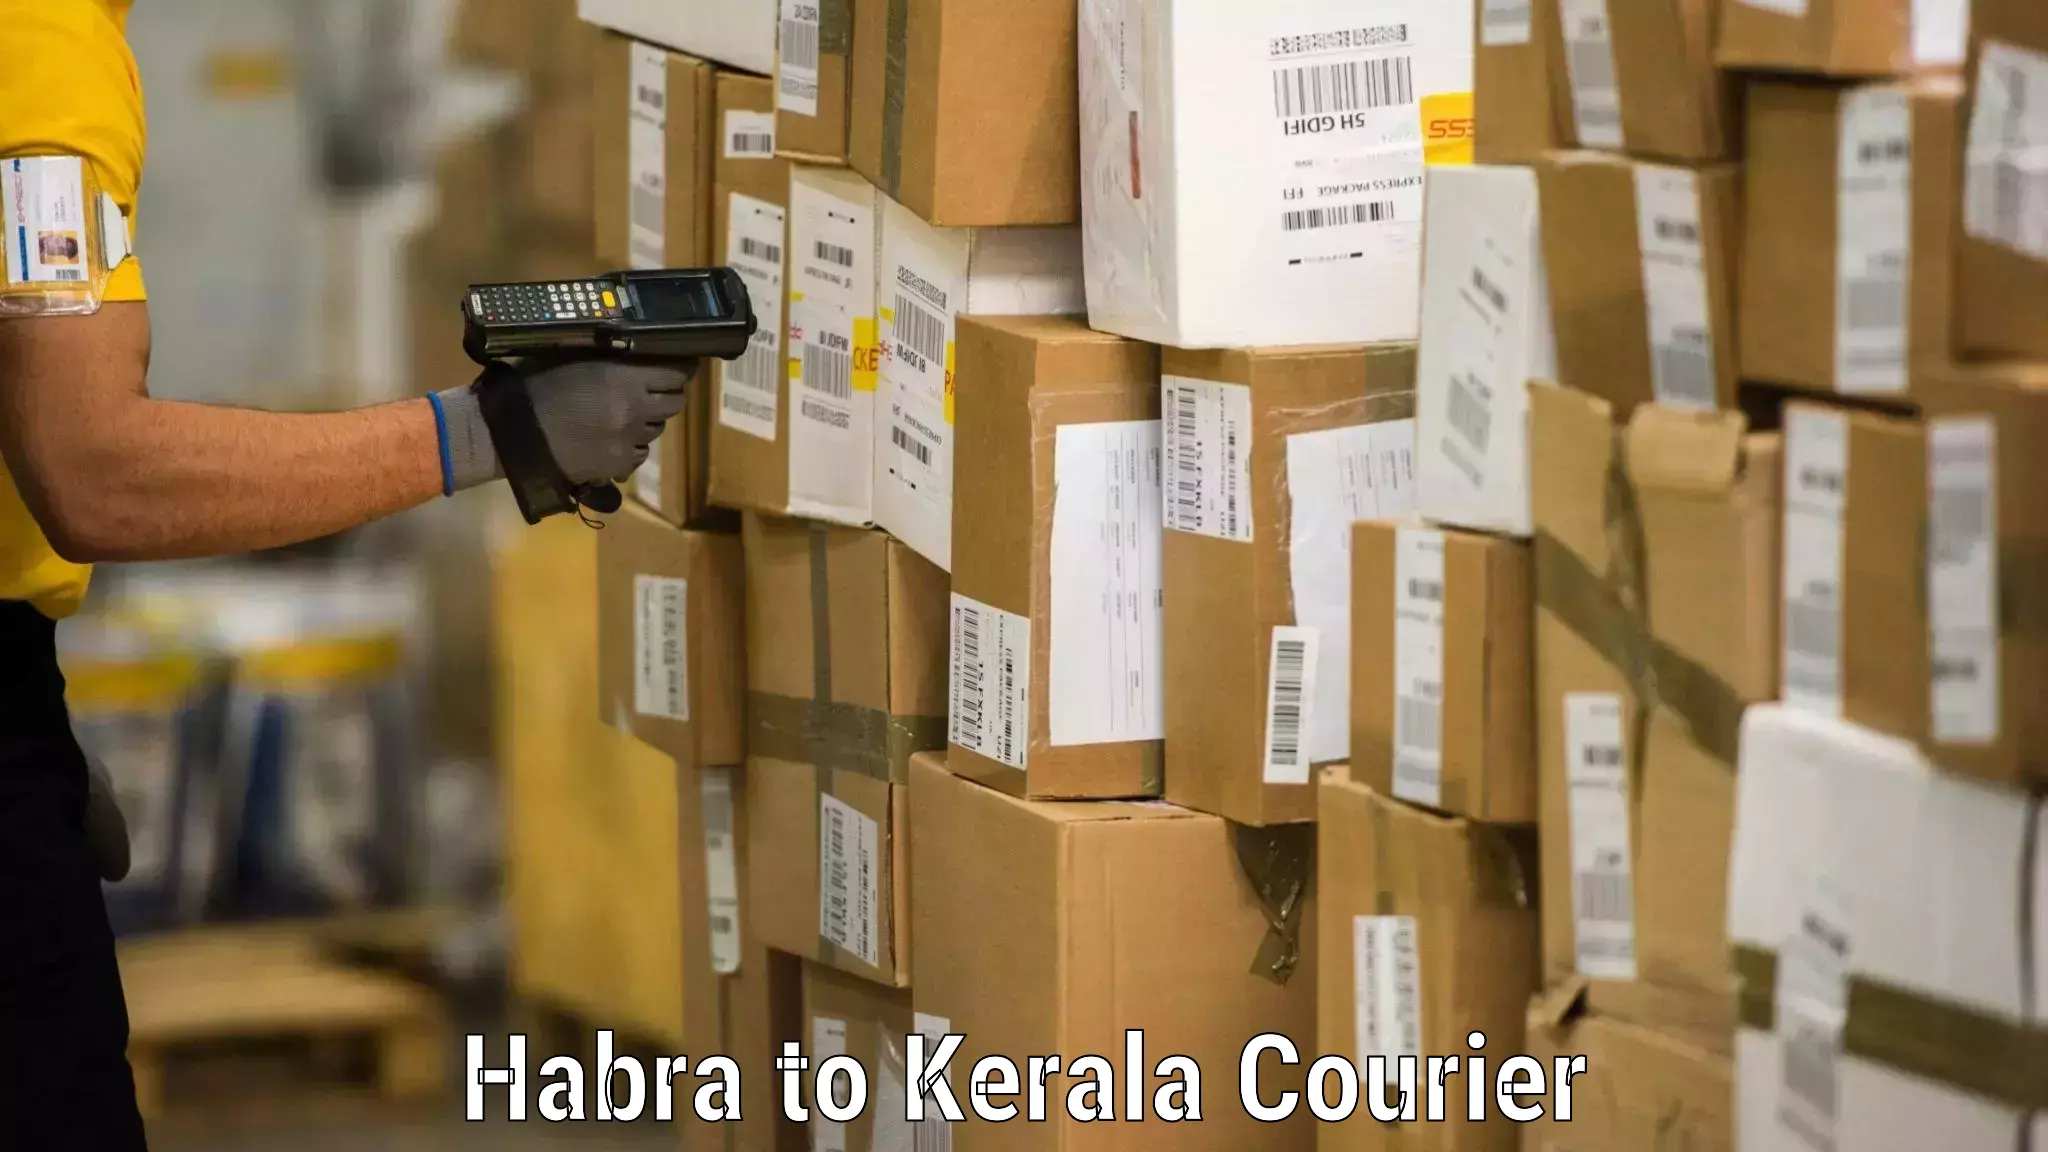 Furniture relocation experts Habra to Kerala